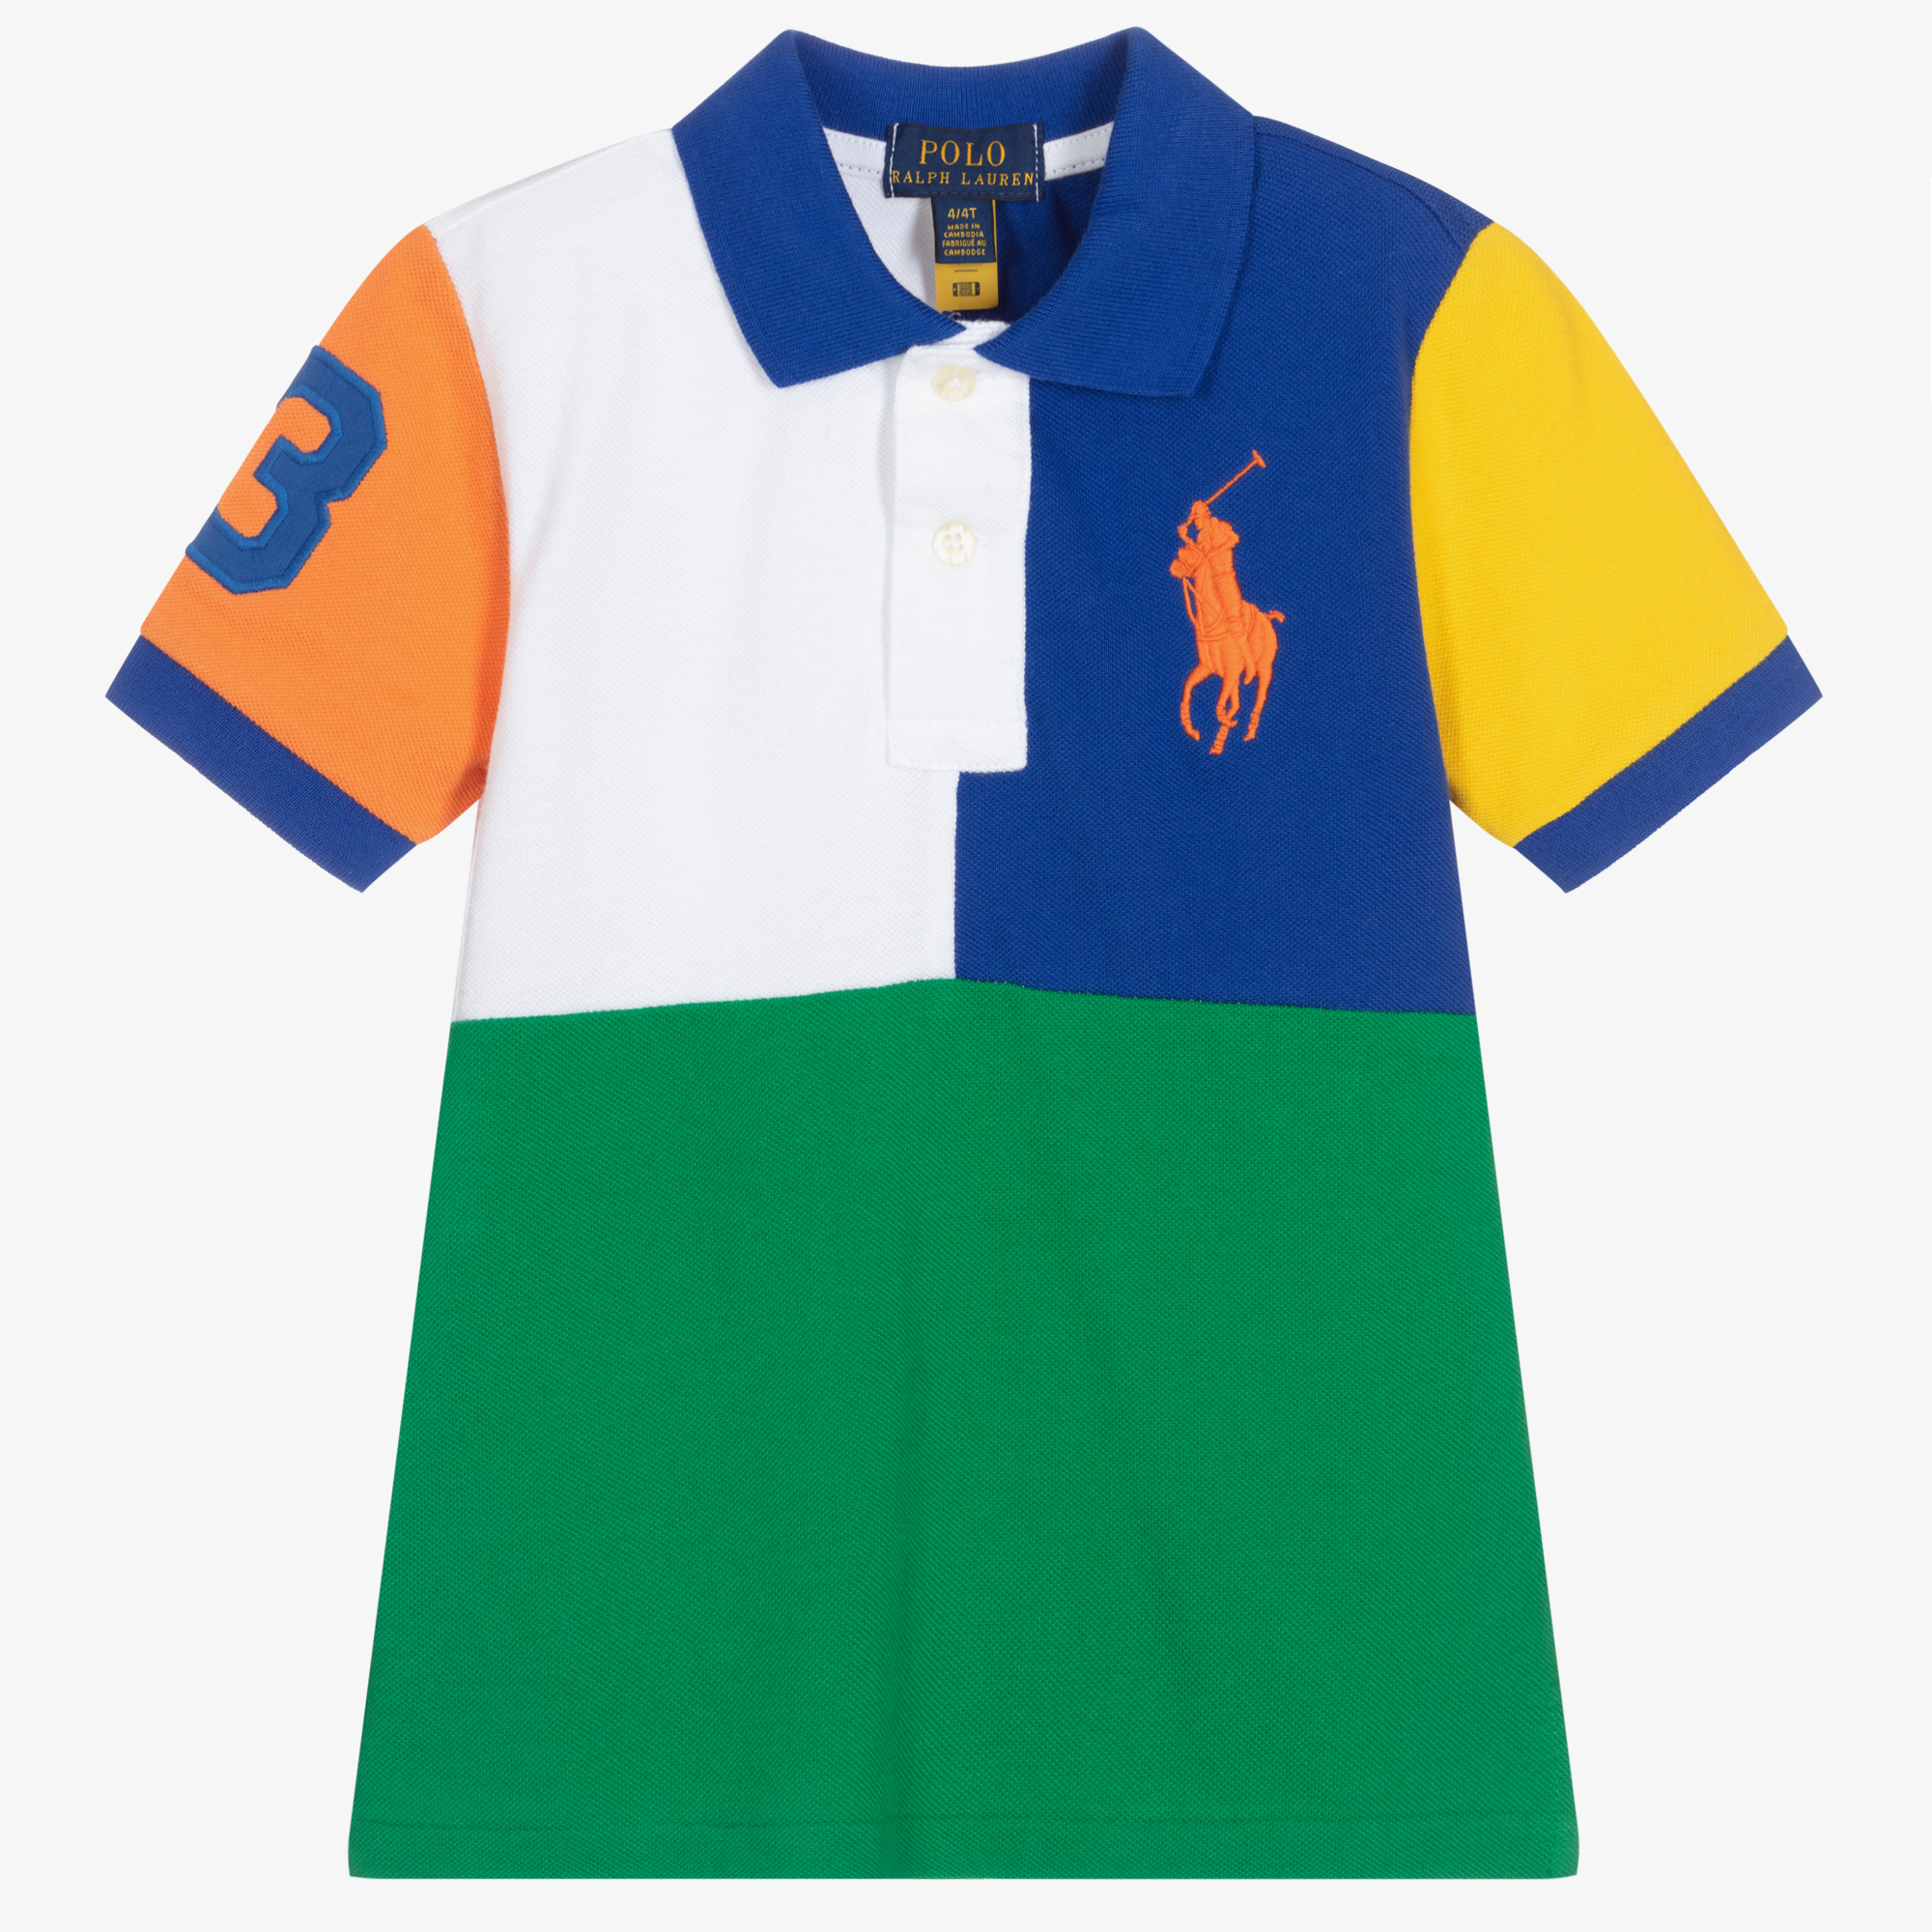 What do you think of the big ponies on Polo Ralph Lauren clothes